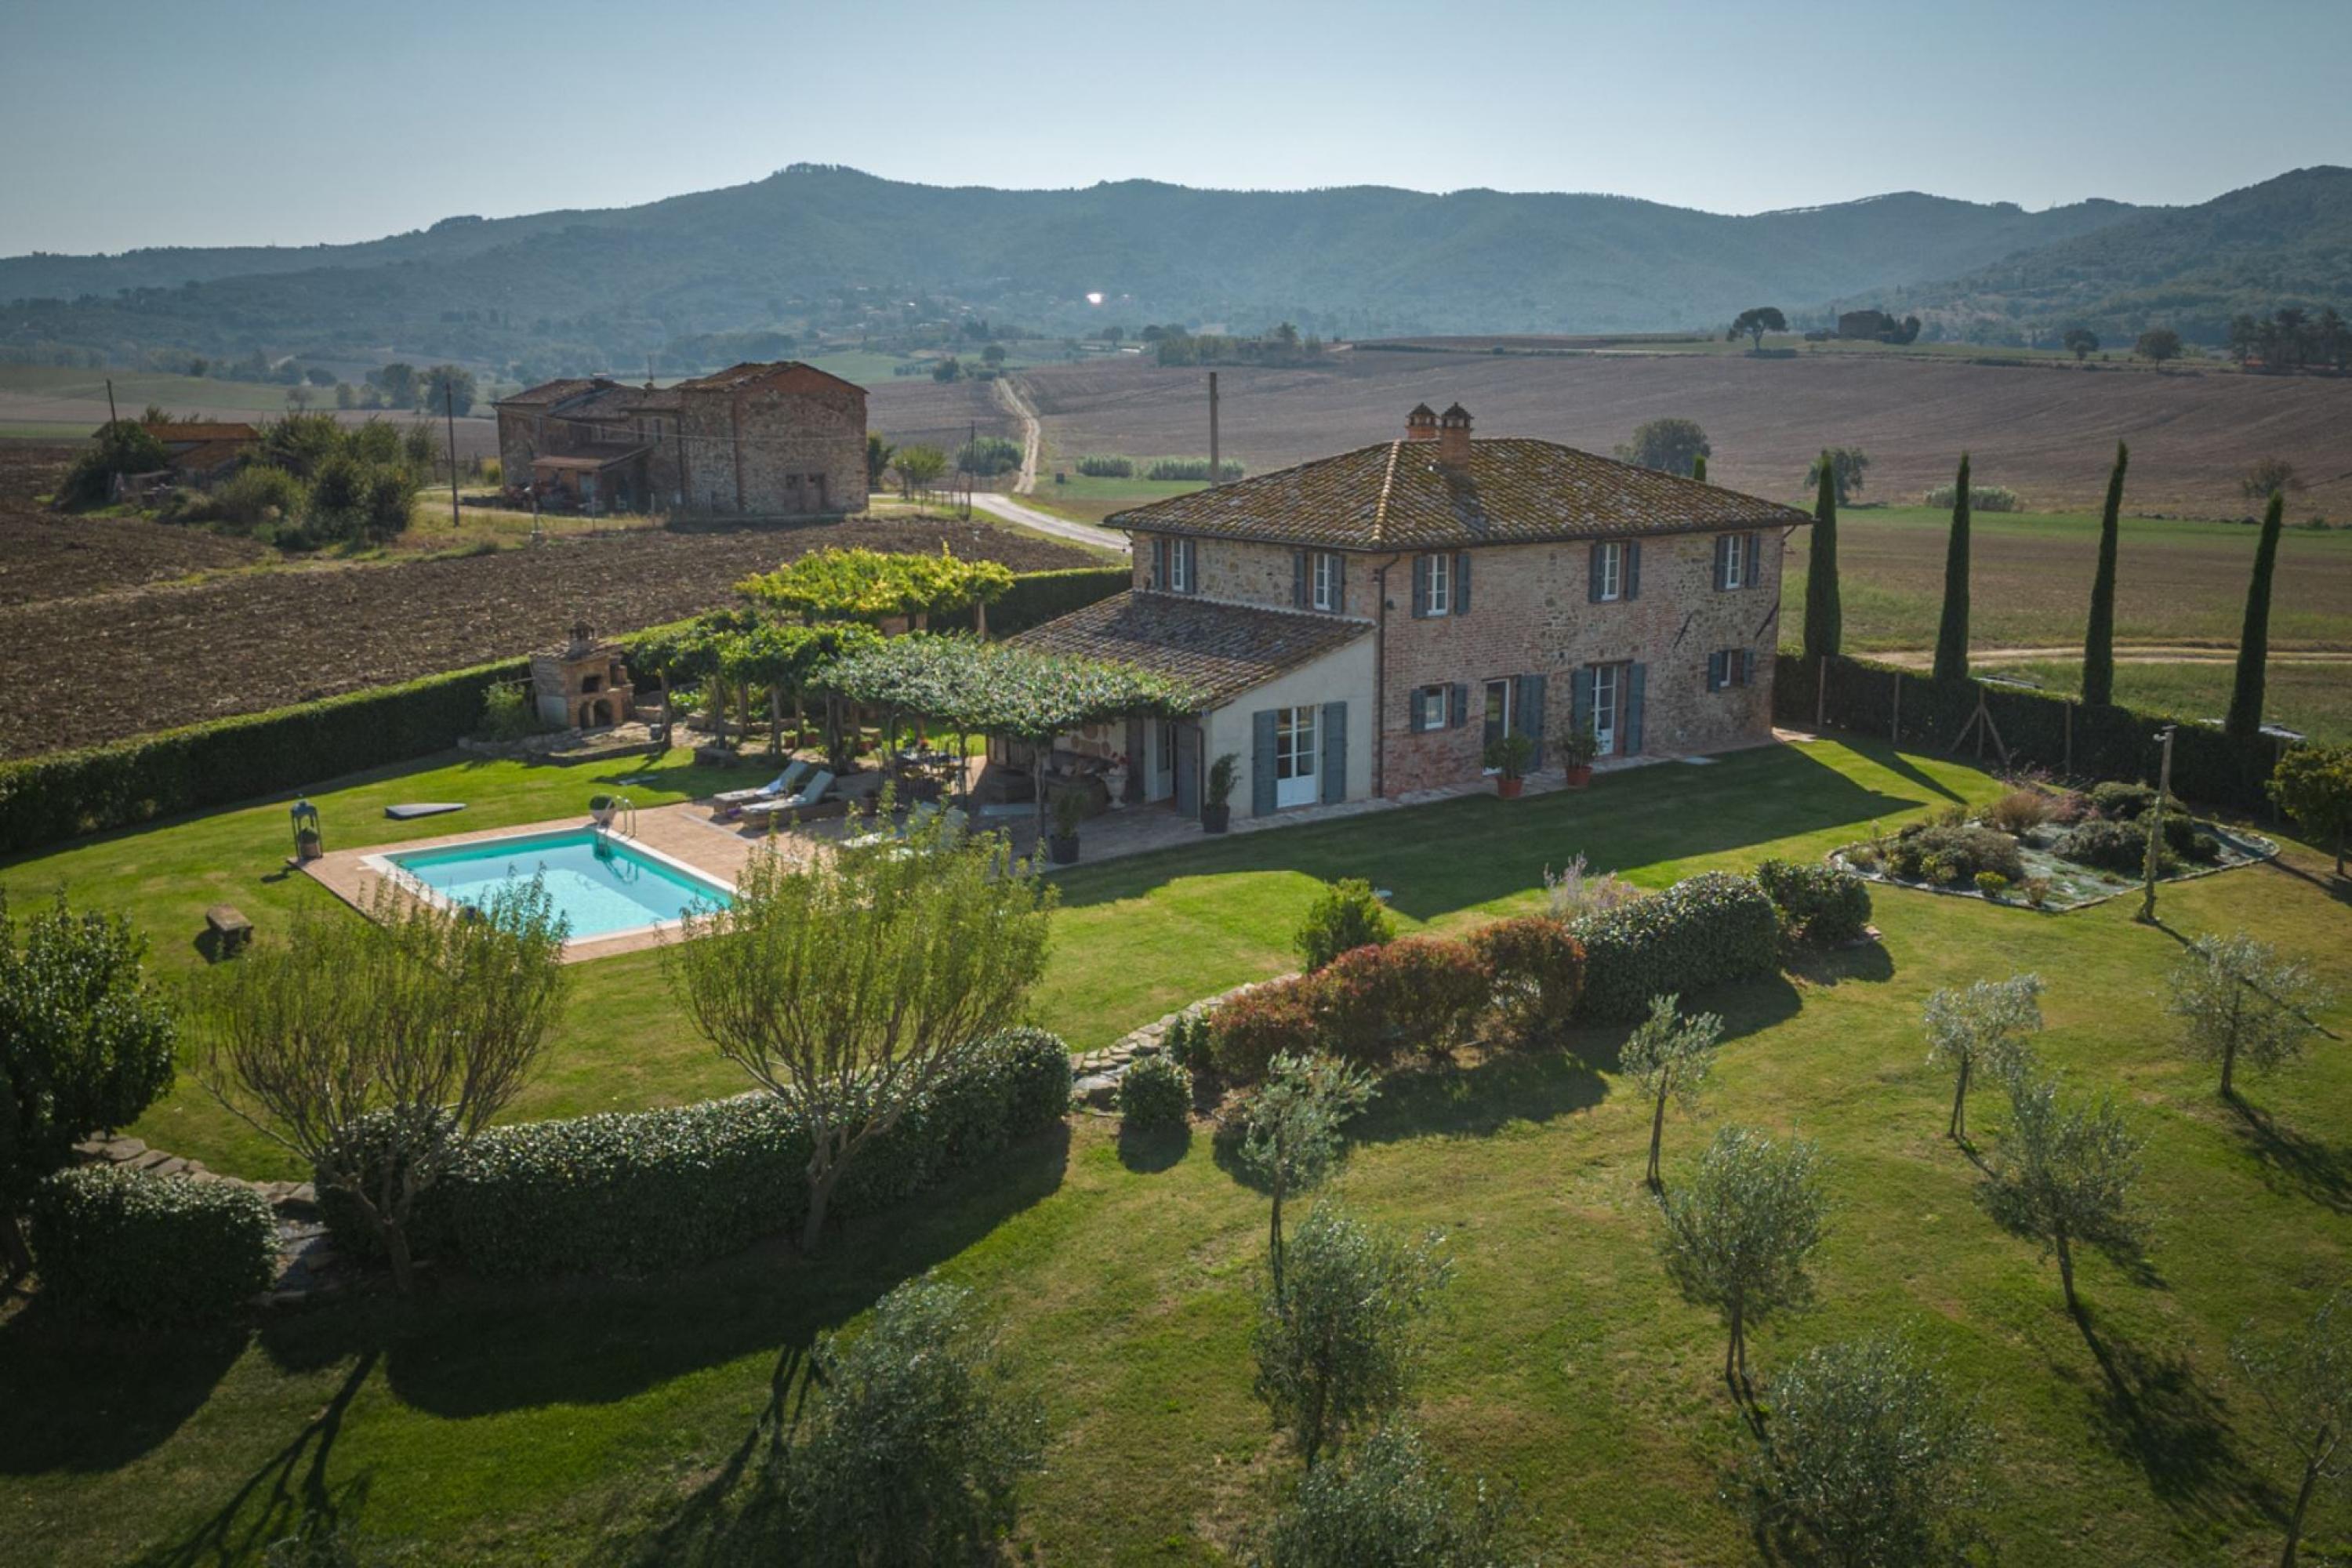 Property Image 2 - Casale dei Girasoli is immersed in verdant fields  on some of the most fertile and beautiful lands i-Casal